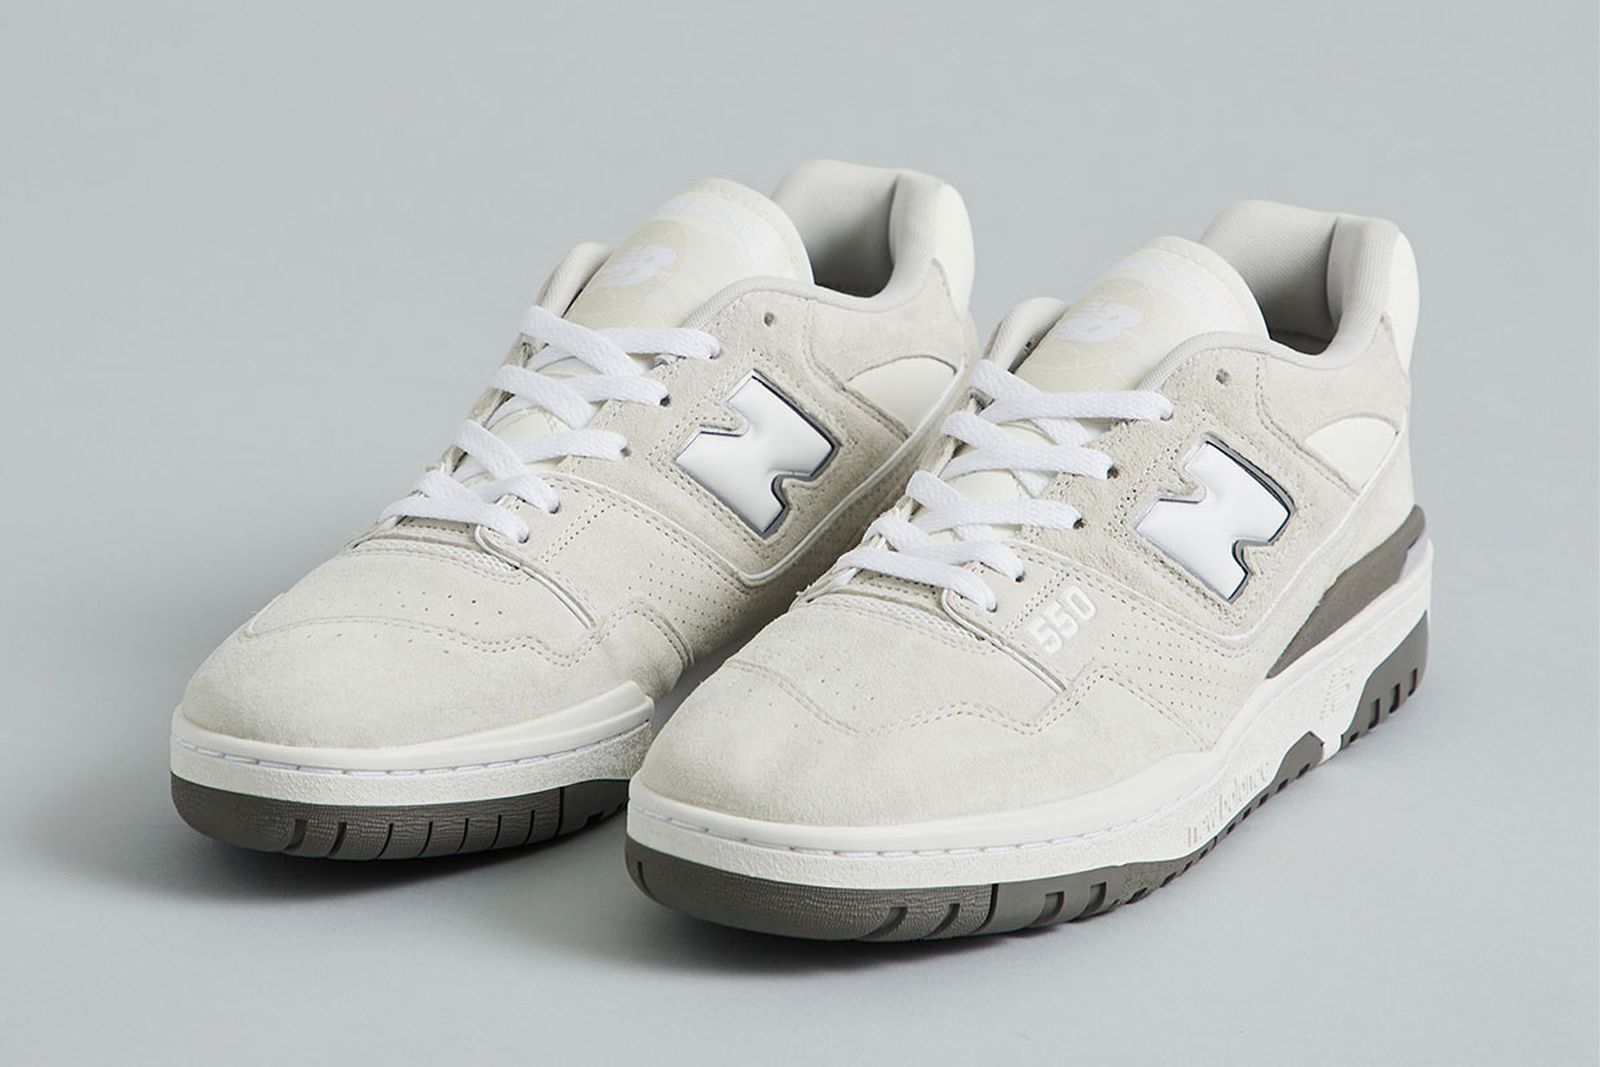 United Arrows x New Balance 550: Release Date, Info, Price